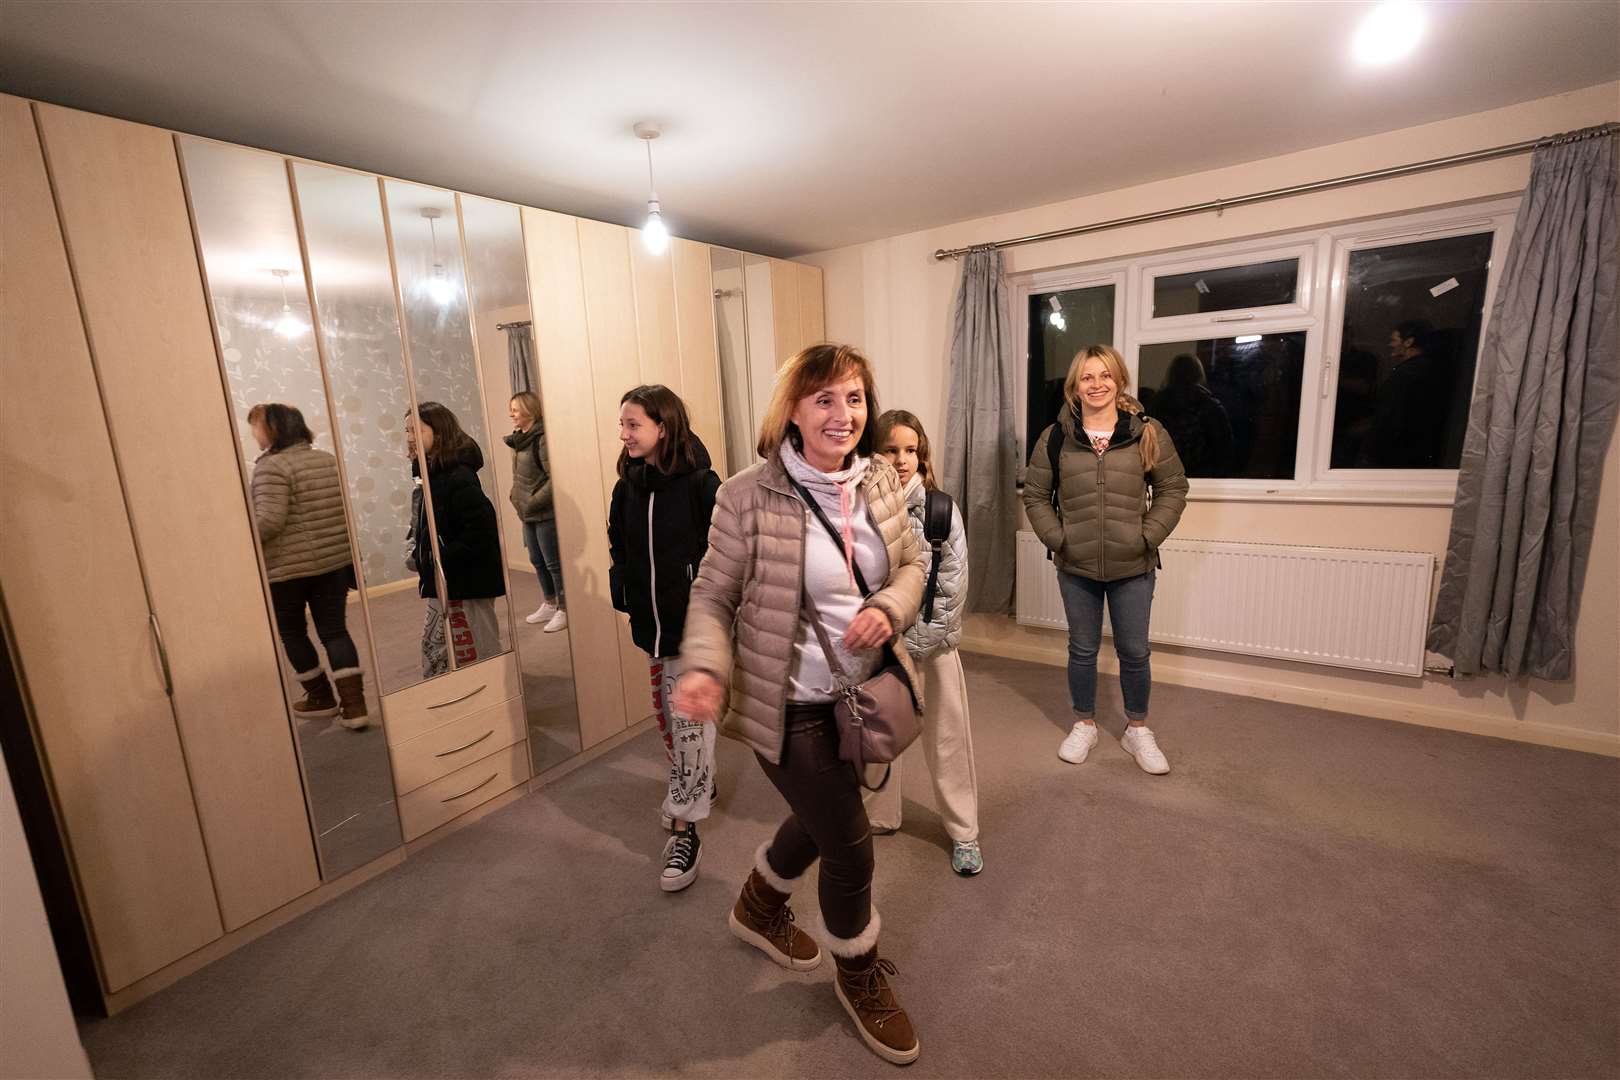 Iryna Starkova and her family look around one of the bedrooms in their new home in Caldecote near Cambridge. (Joe Giddens/ PA)